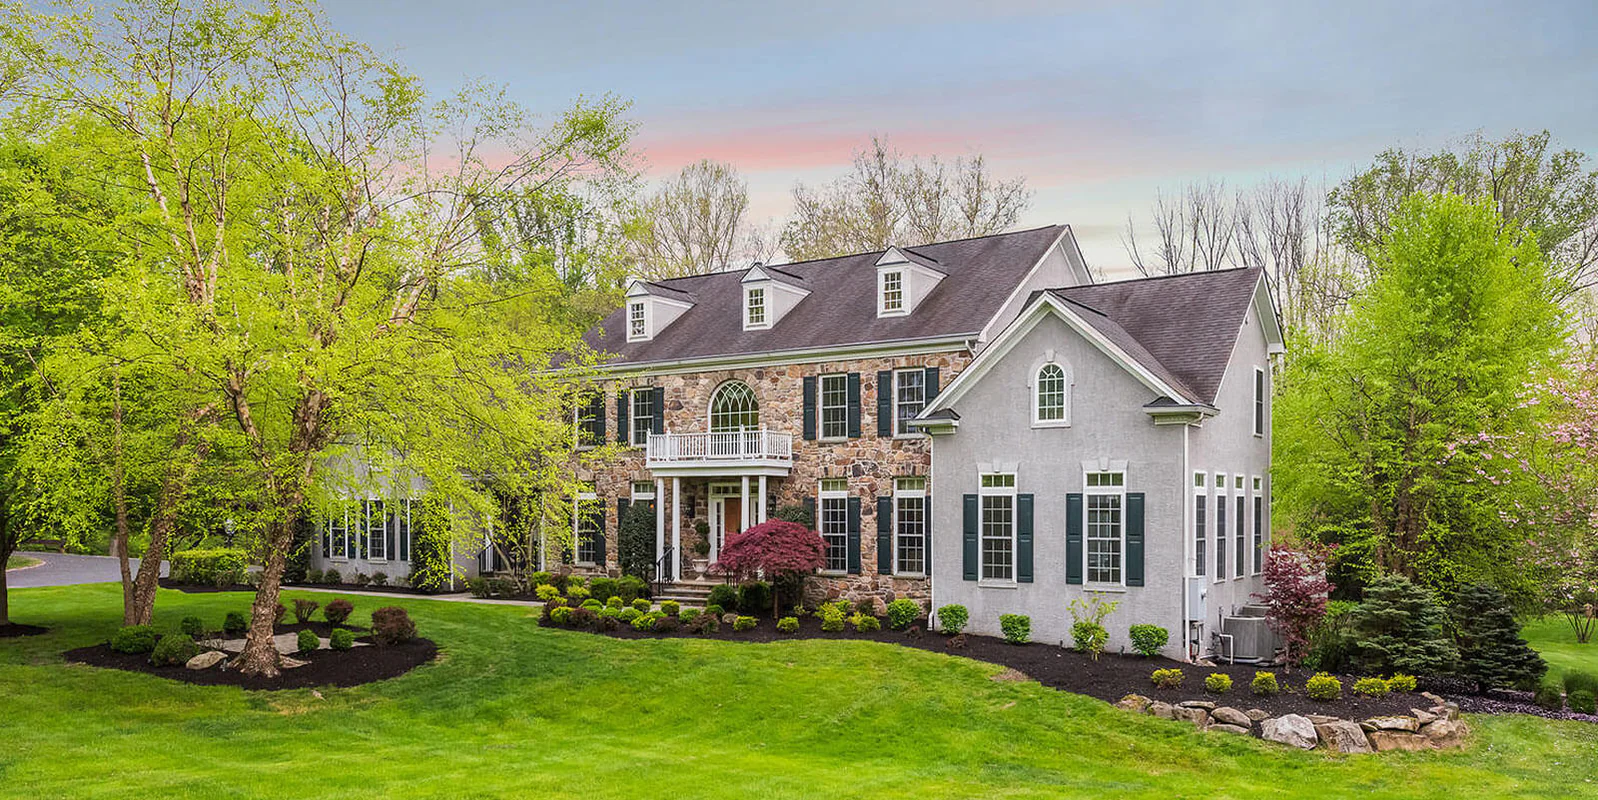 New Homes for Sale in Phoenixville, PA